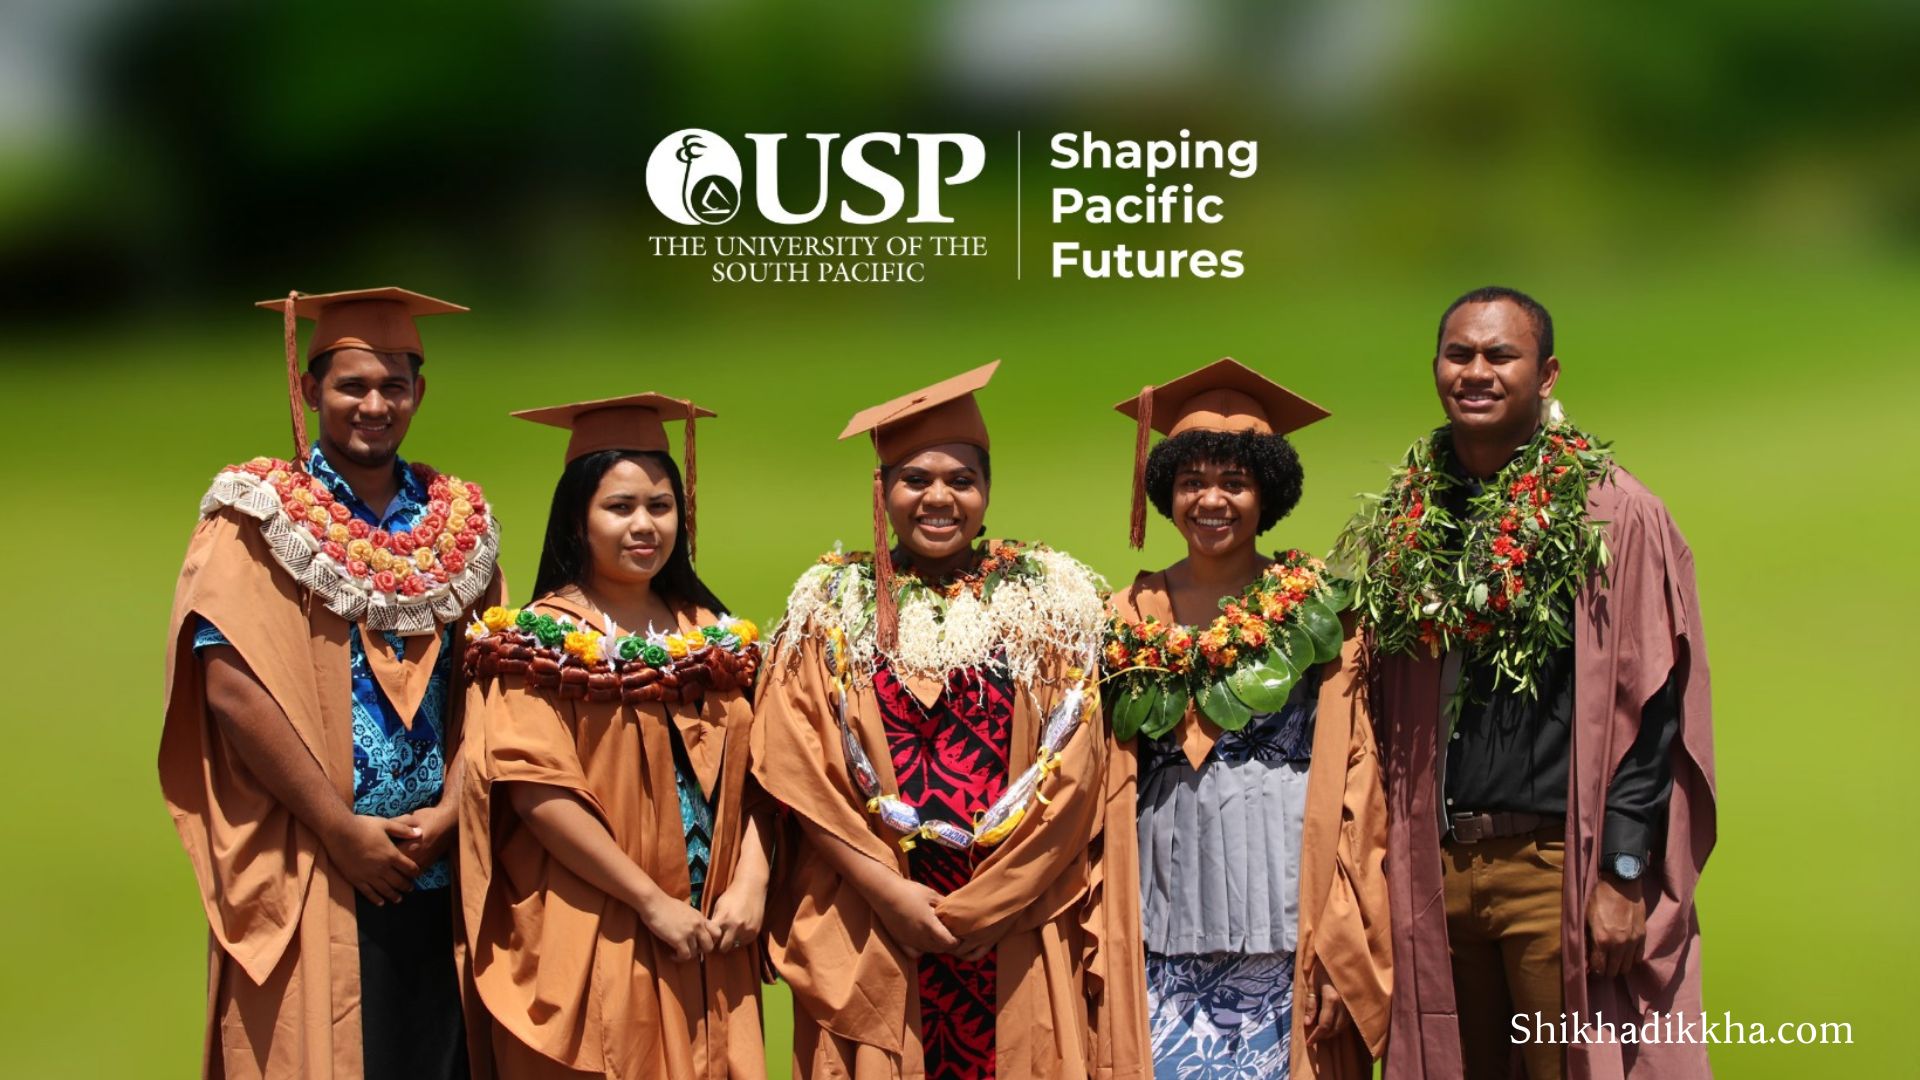 University of the South Pacific mba